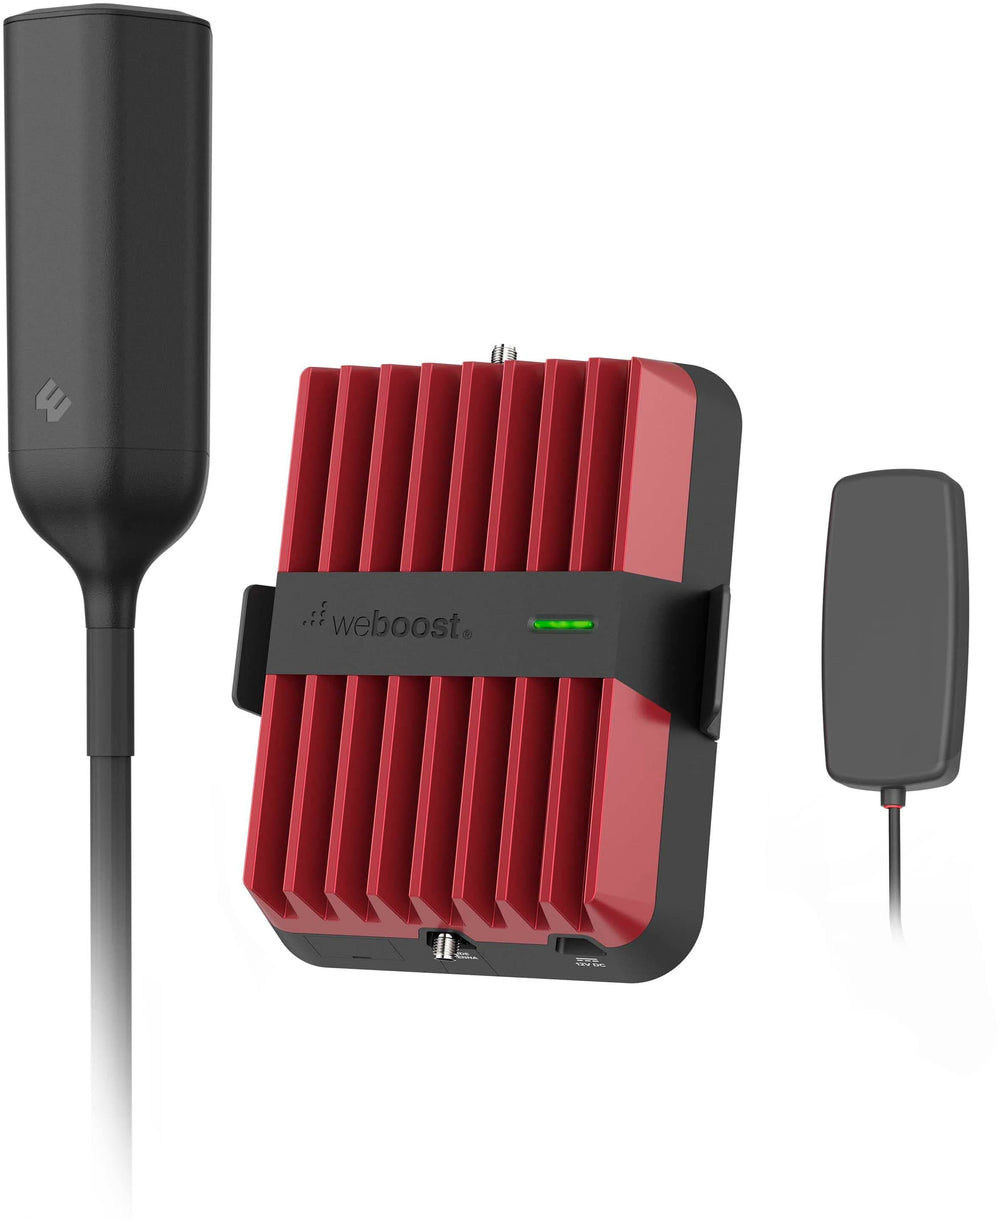 weBoost - Drive Reach OTR Cell Signal Booster Kit for Semi-Trucks and Overland Vehicles, Boosts 5G & 4G LTE for All U.S. Carriers_1